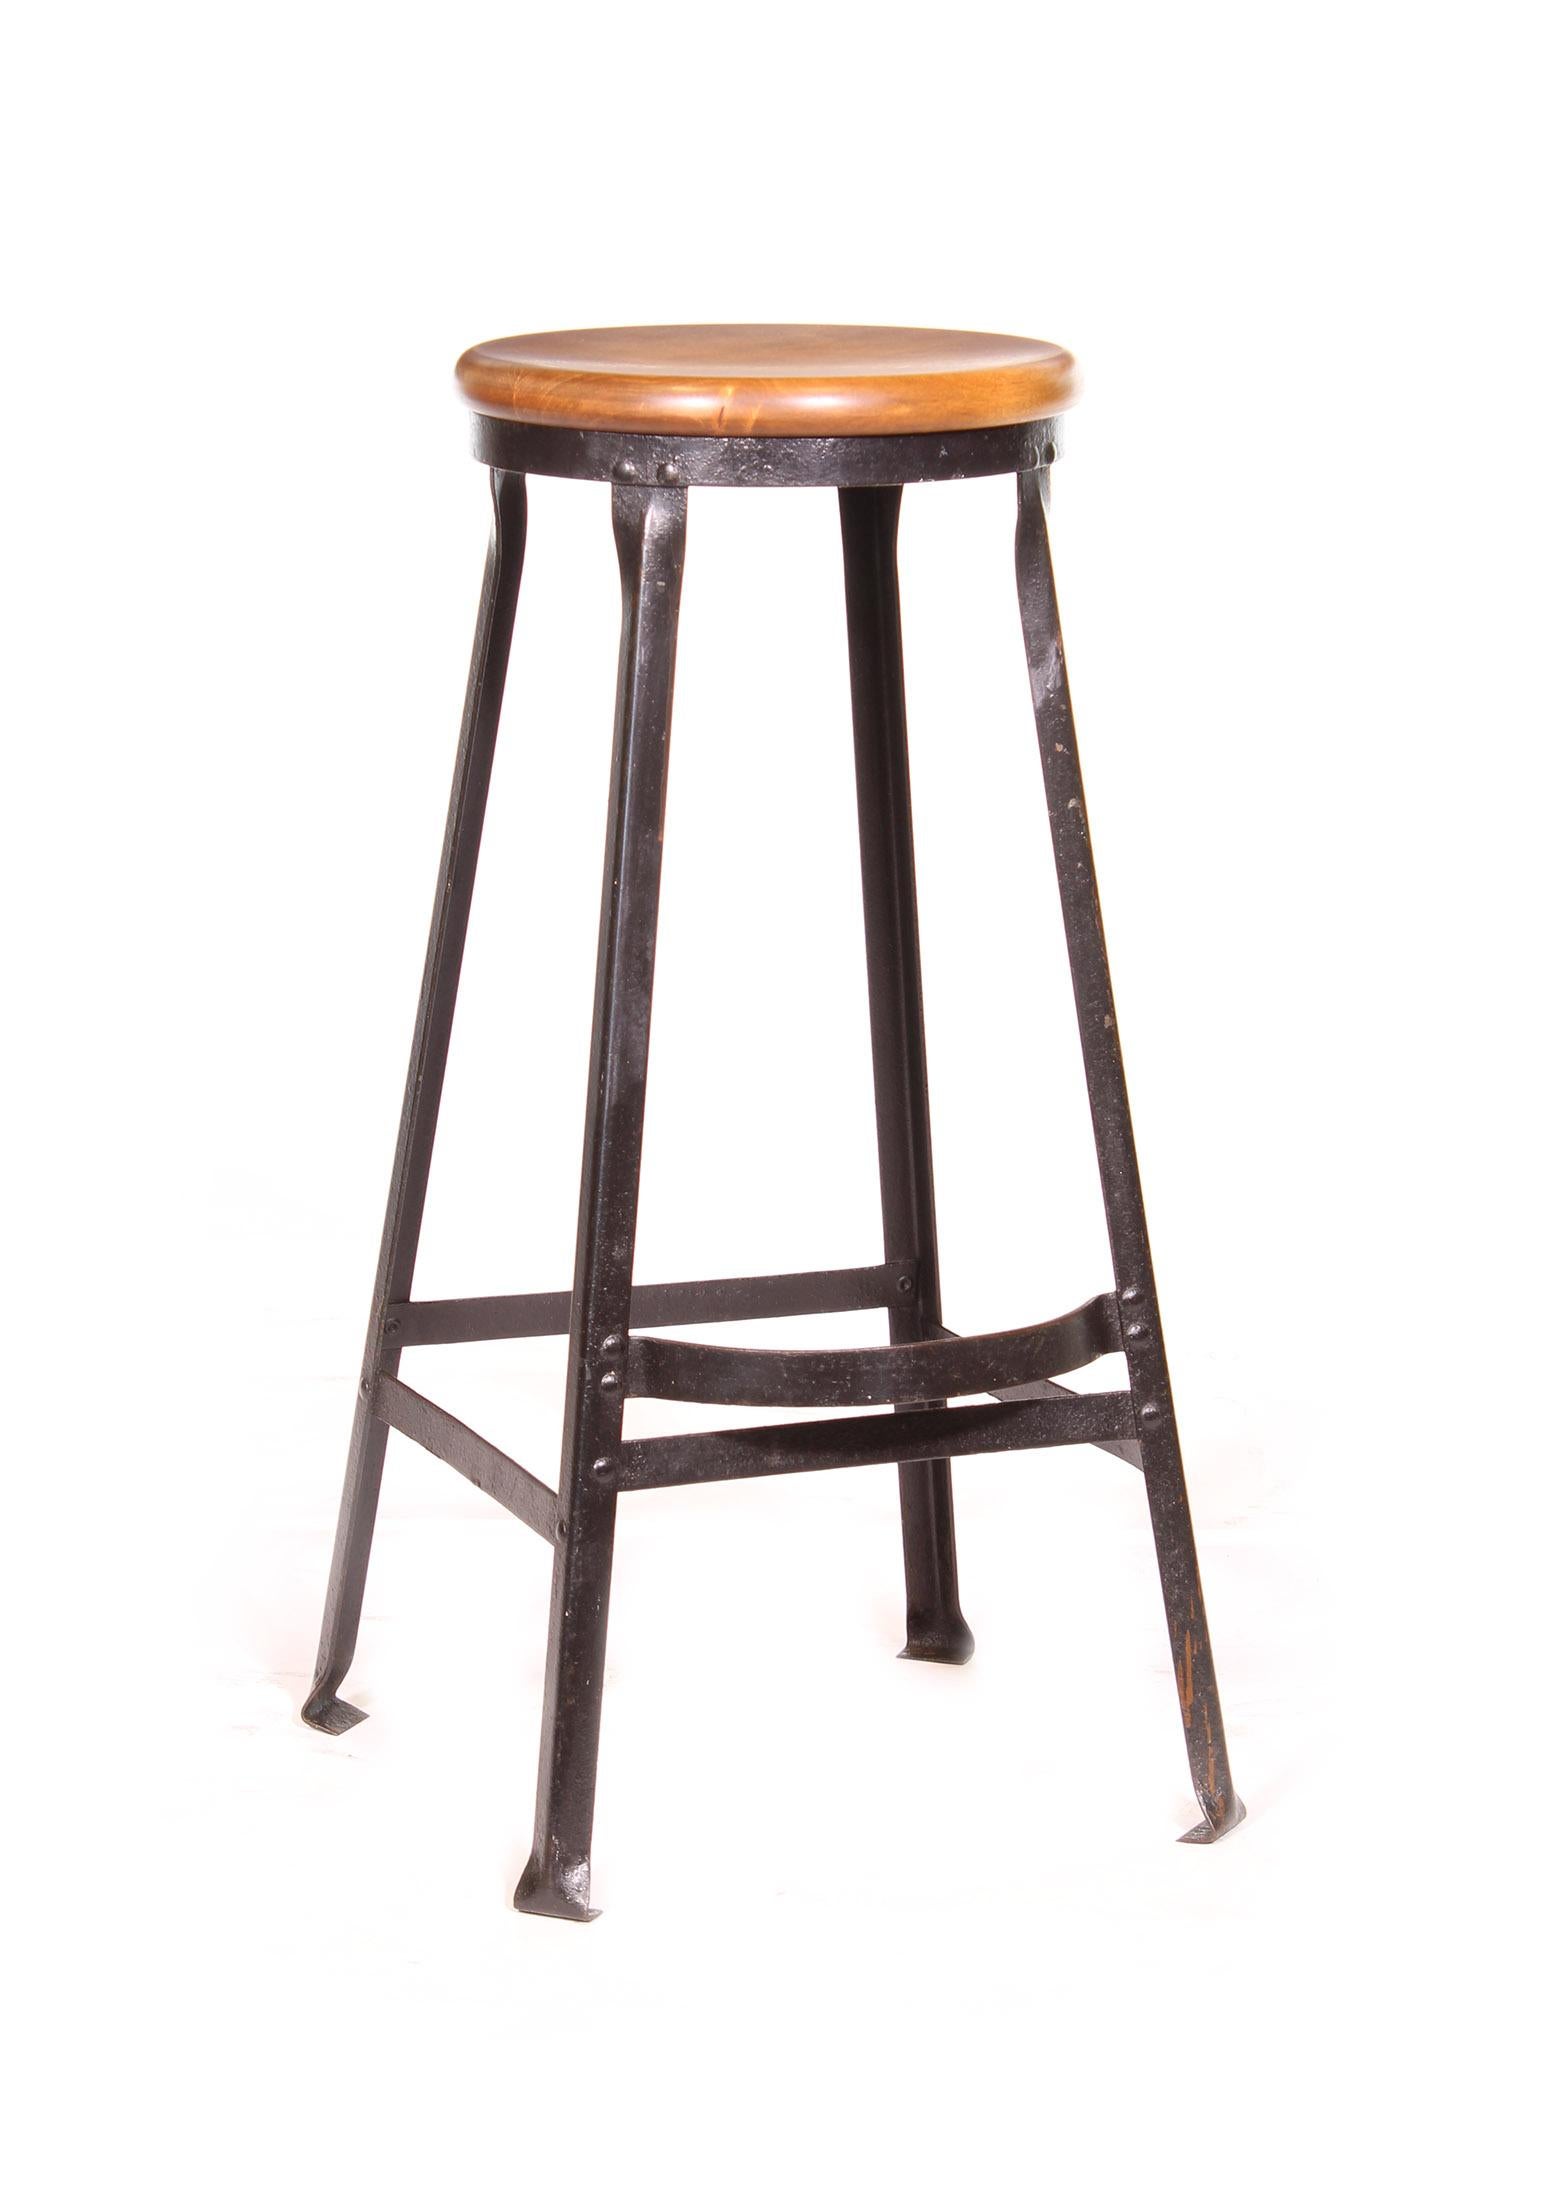 Vintage authentic industrial factory shop / bar / kitchen counter stool. Black worn steel with footrest and maple seat. 30